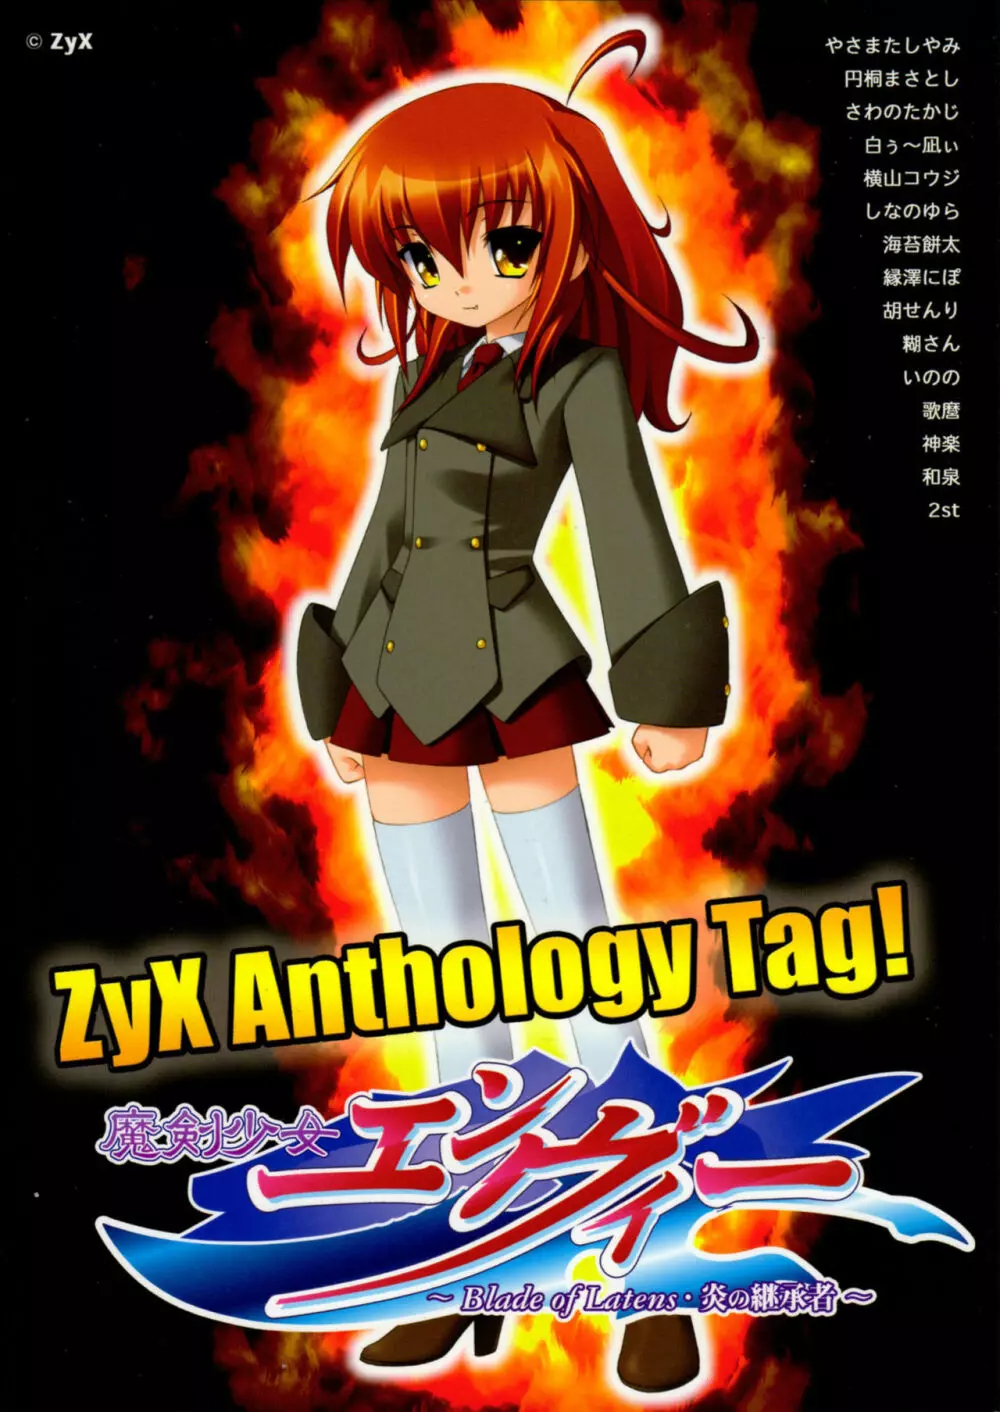 ZyX Anthology Tag! ライディ＆エンヴィー Page.15